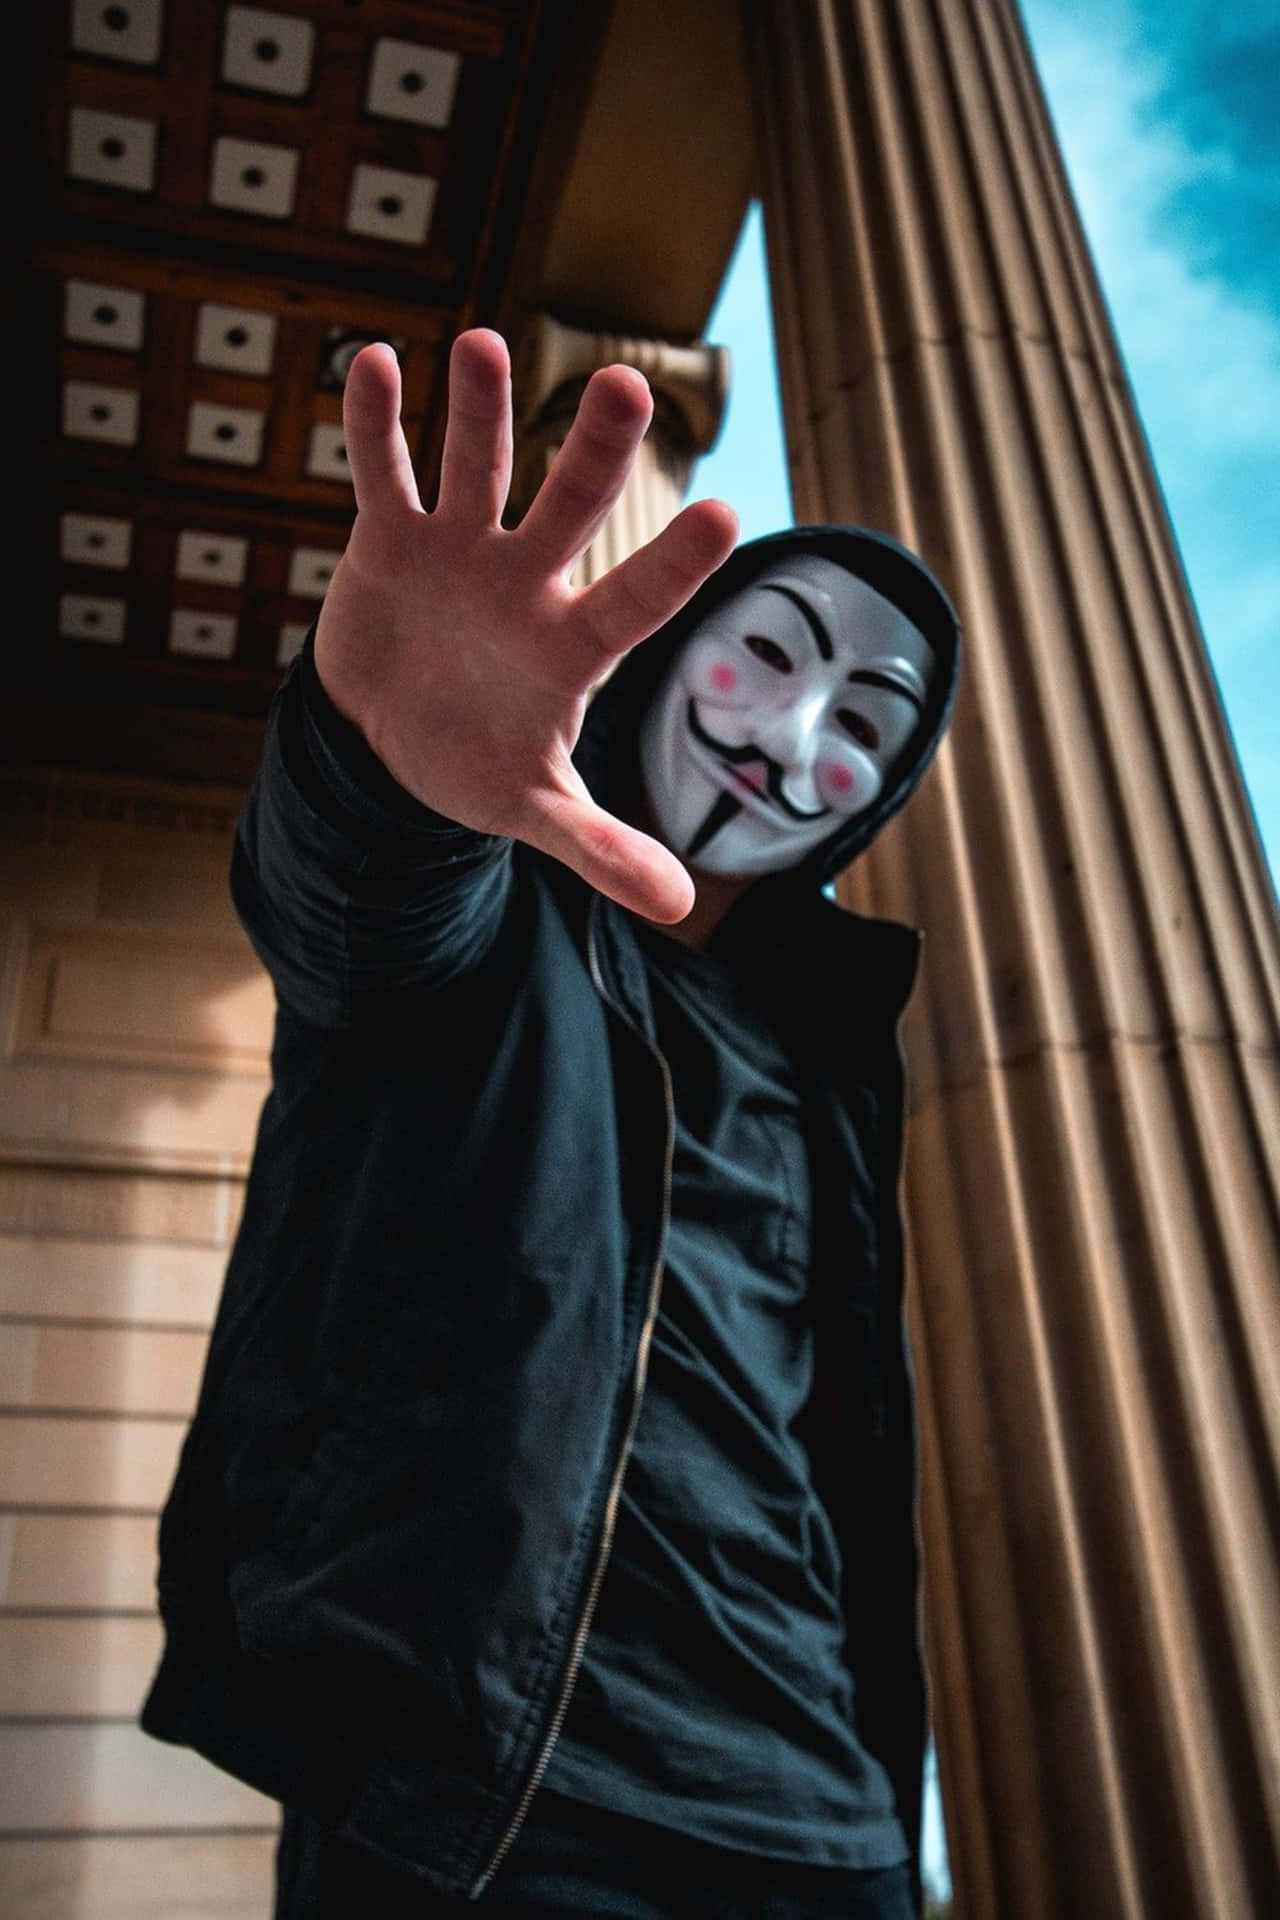 4k Boys Attitude With Anonymous Hacker Mask Background